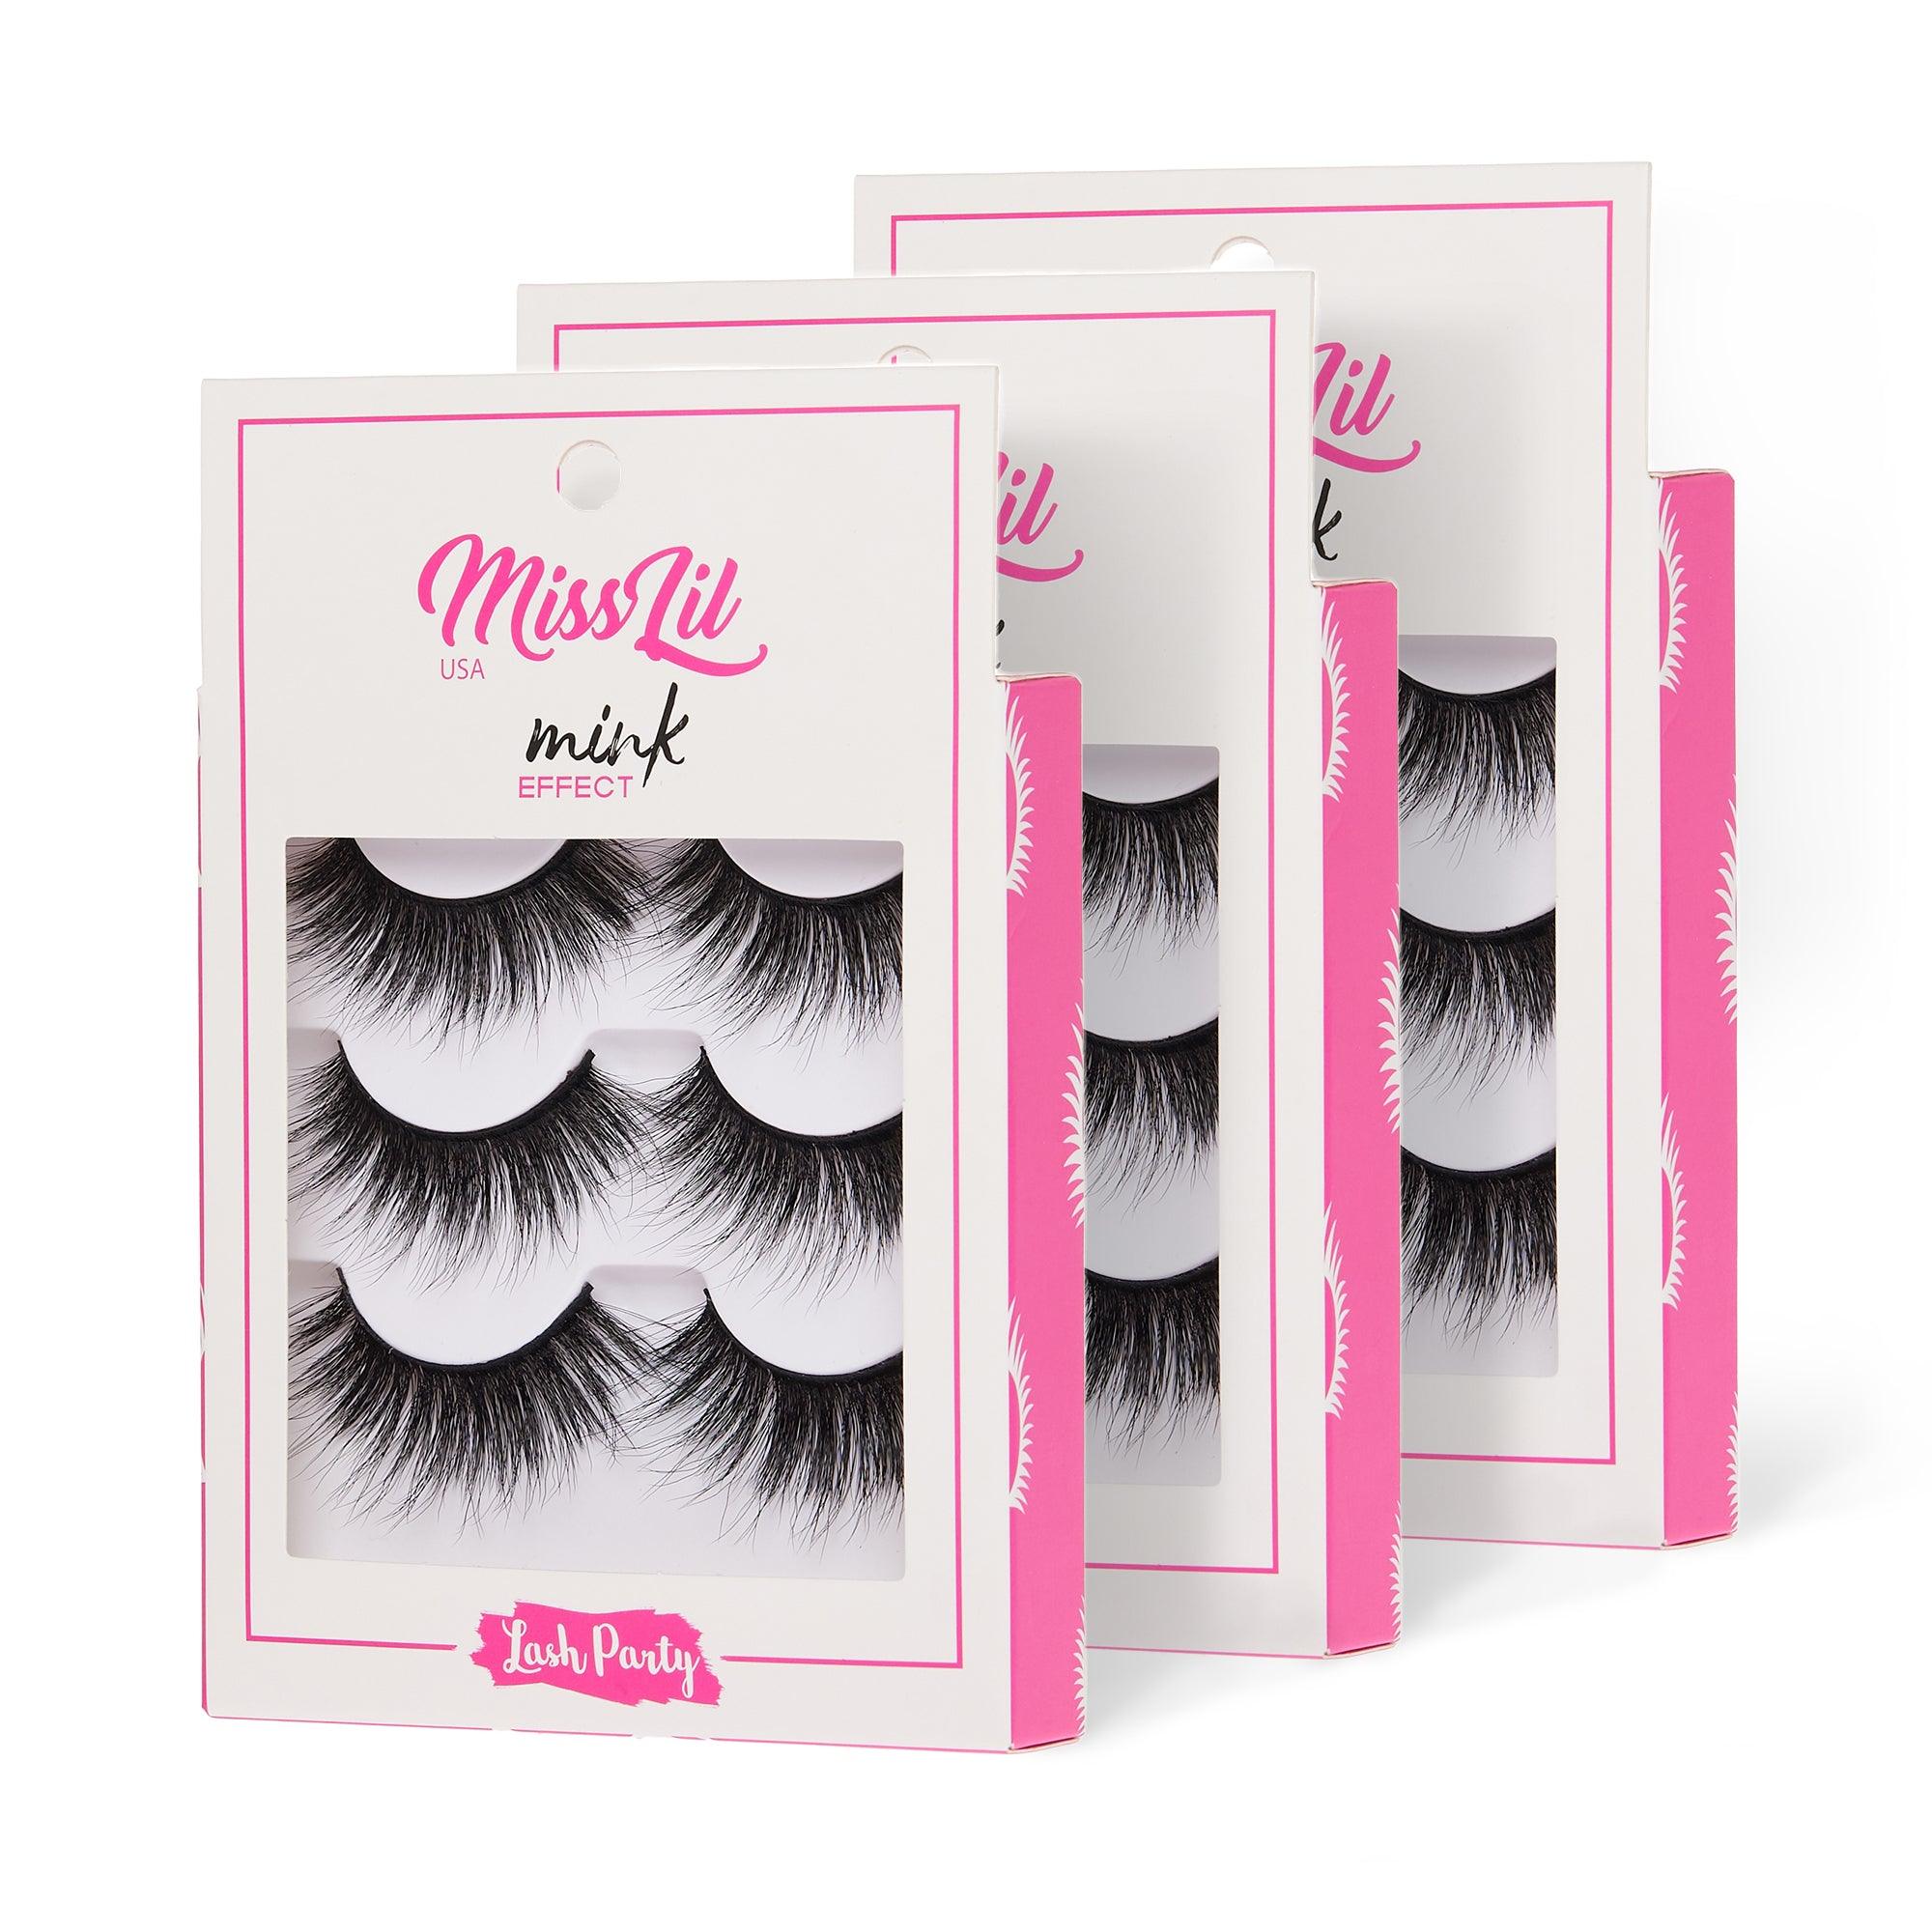 3-Pair Faux Mink Effect Eyelashes - Lash Party Collection #2 - Pack of 3 - Miss Lil USA